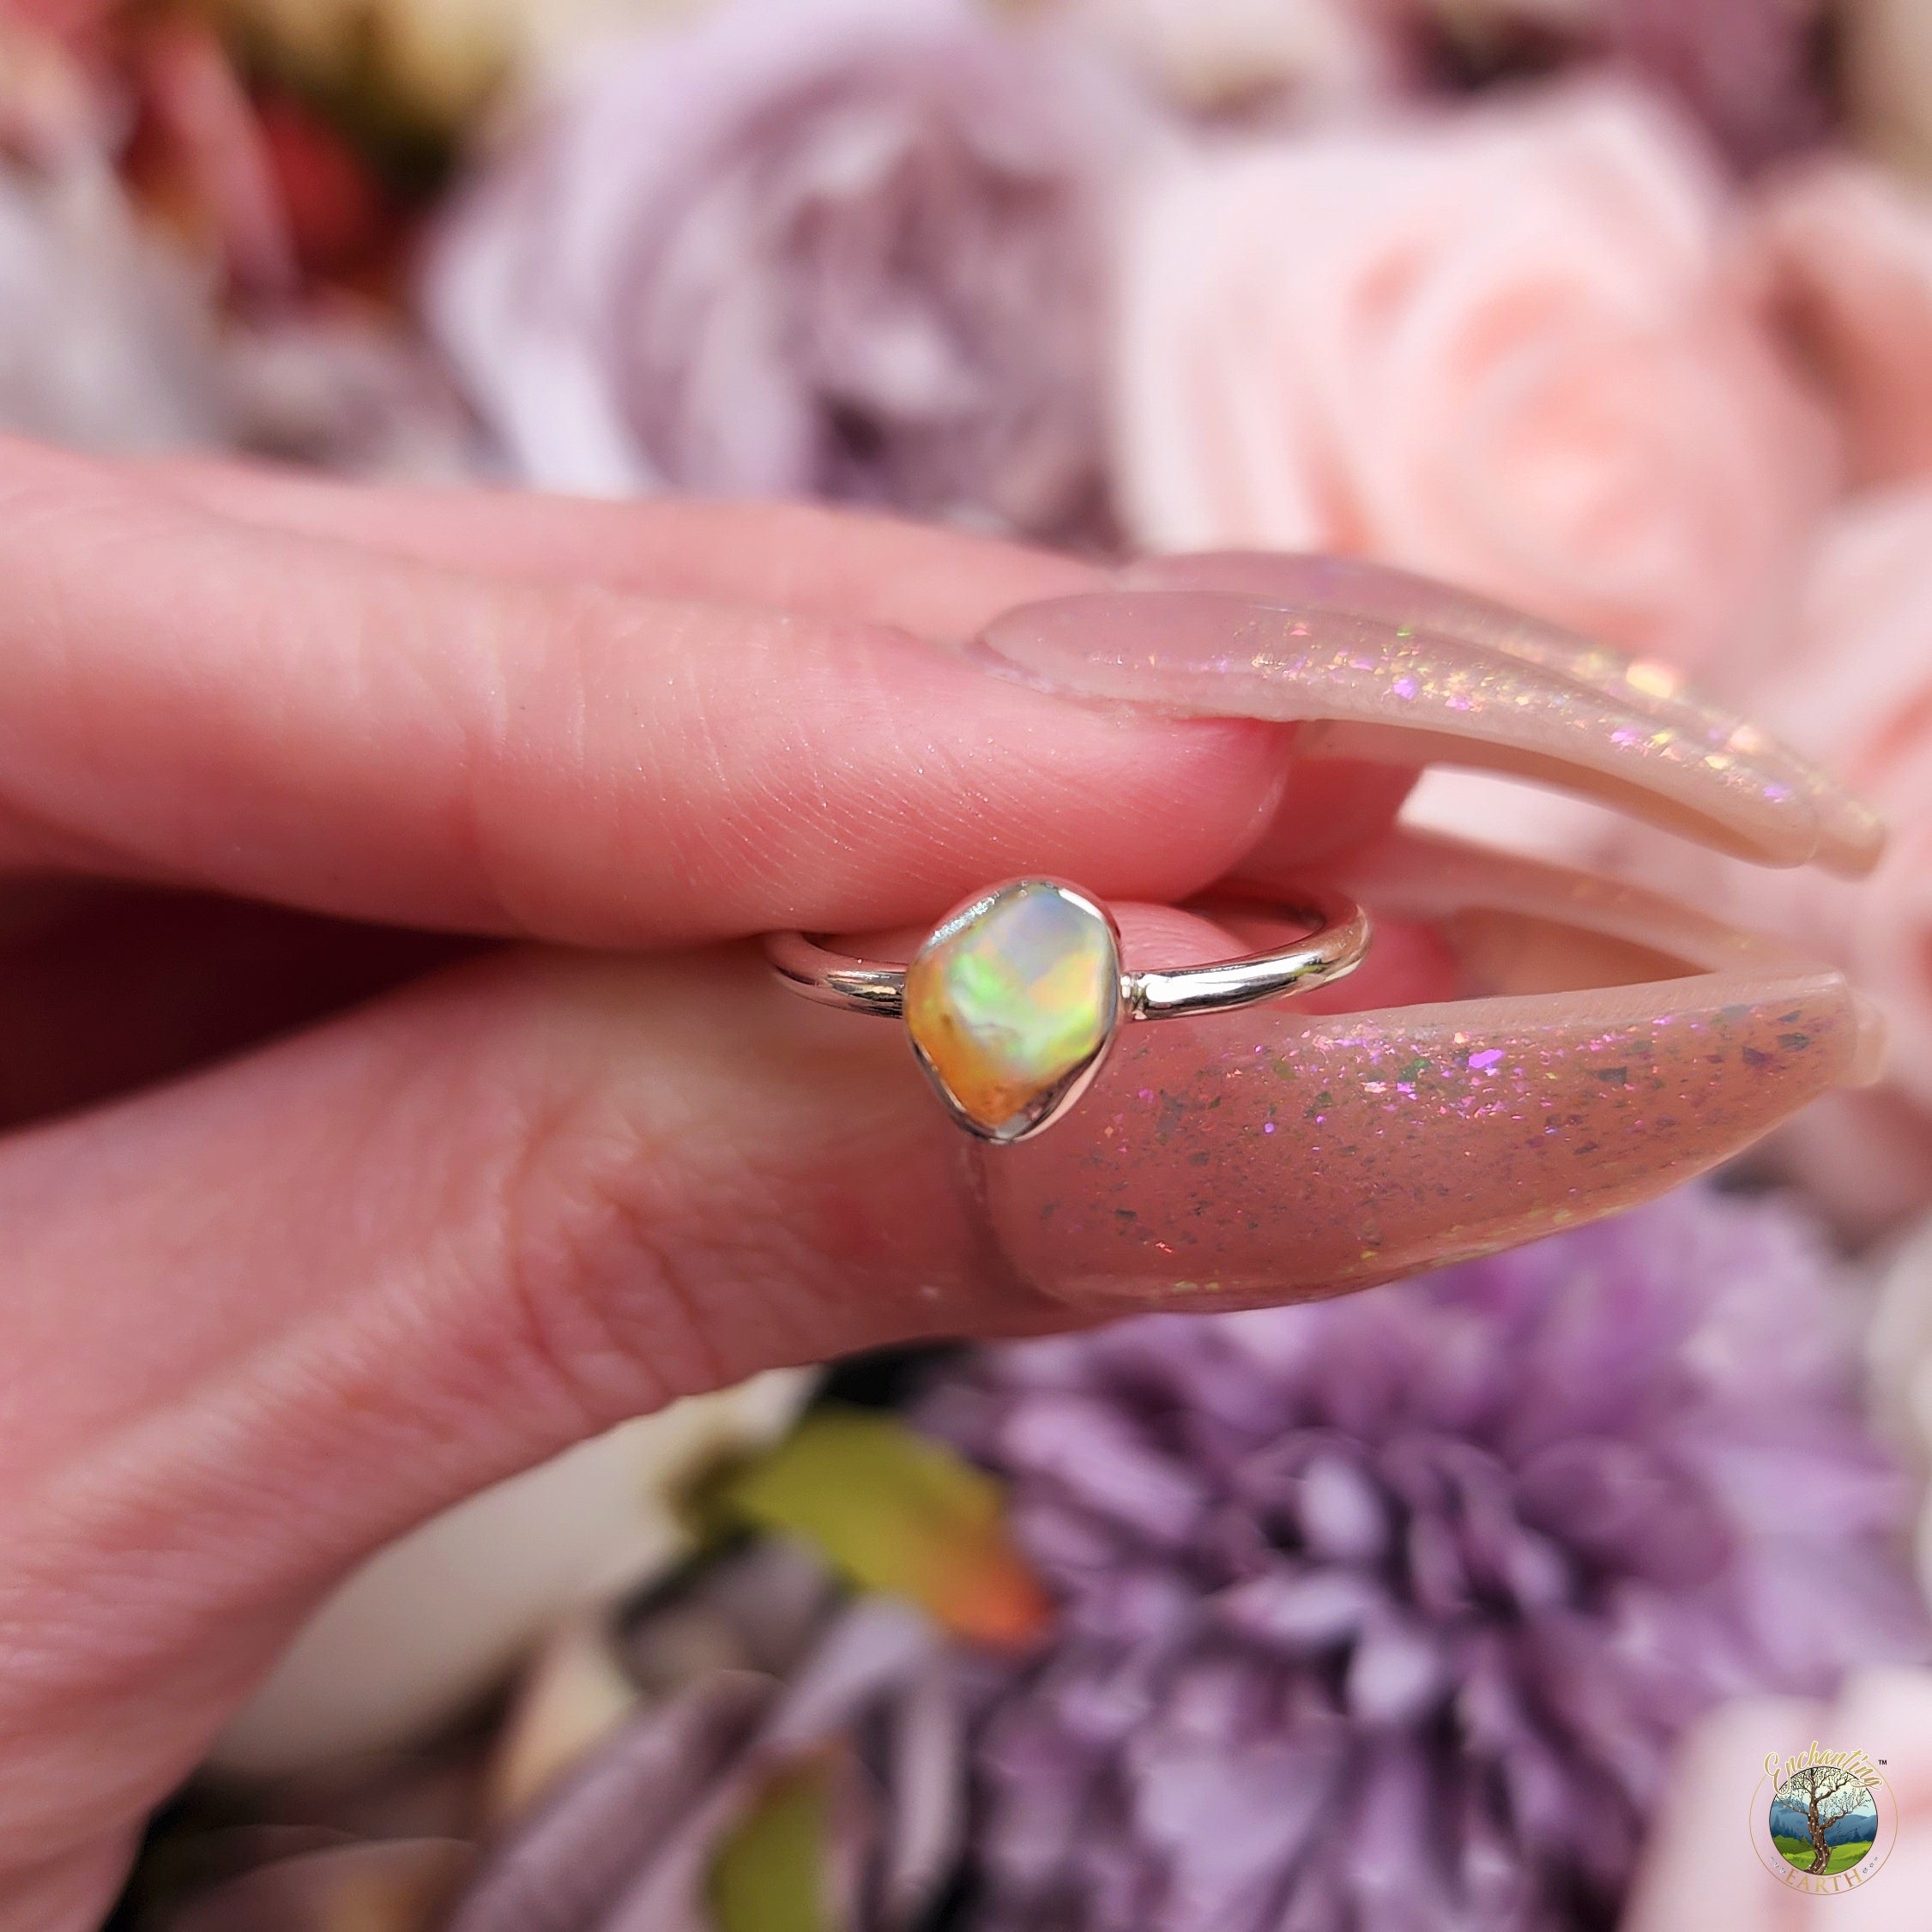 Ethiopian Opal Raw Dainty Ring .925 Silver for Creativity, Joy and Pursuing your Dreams